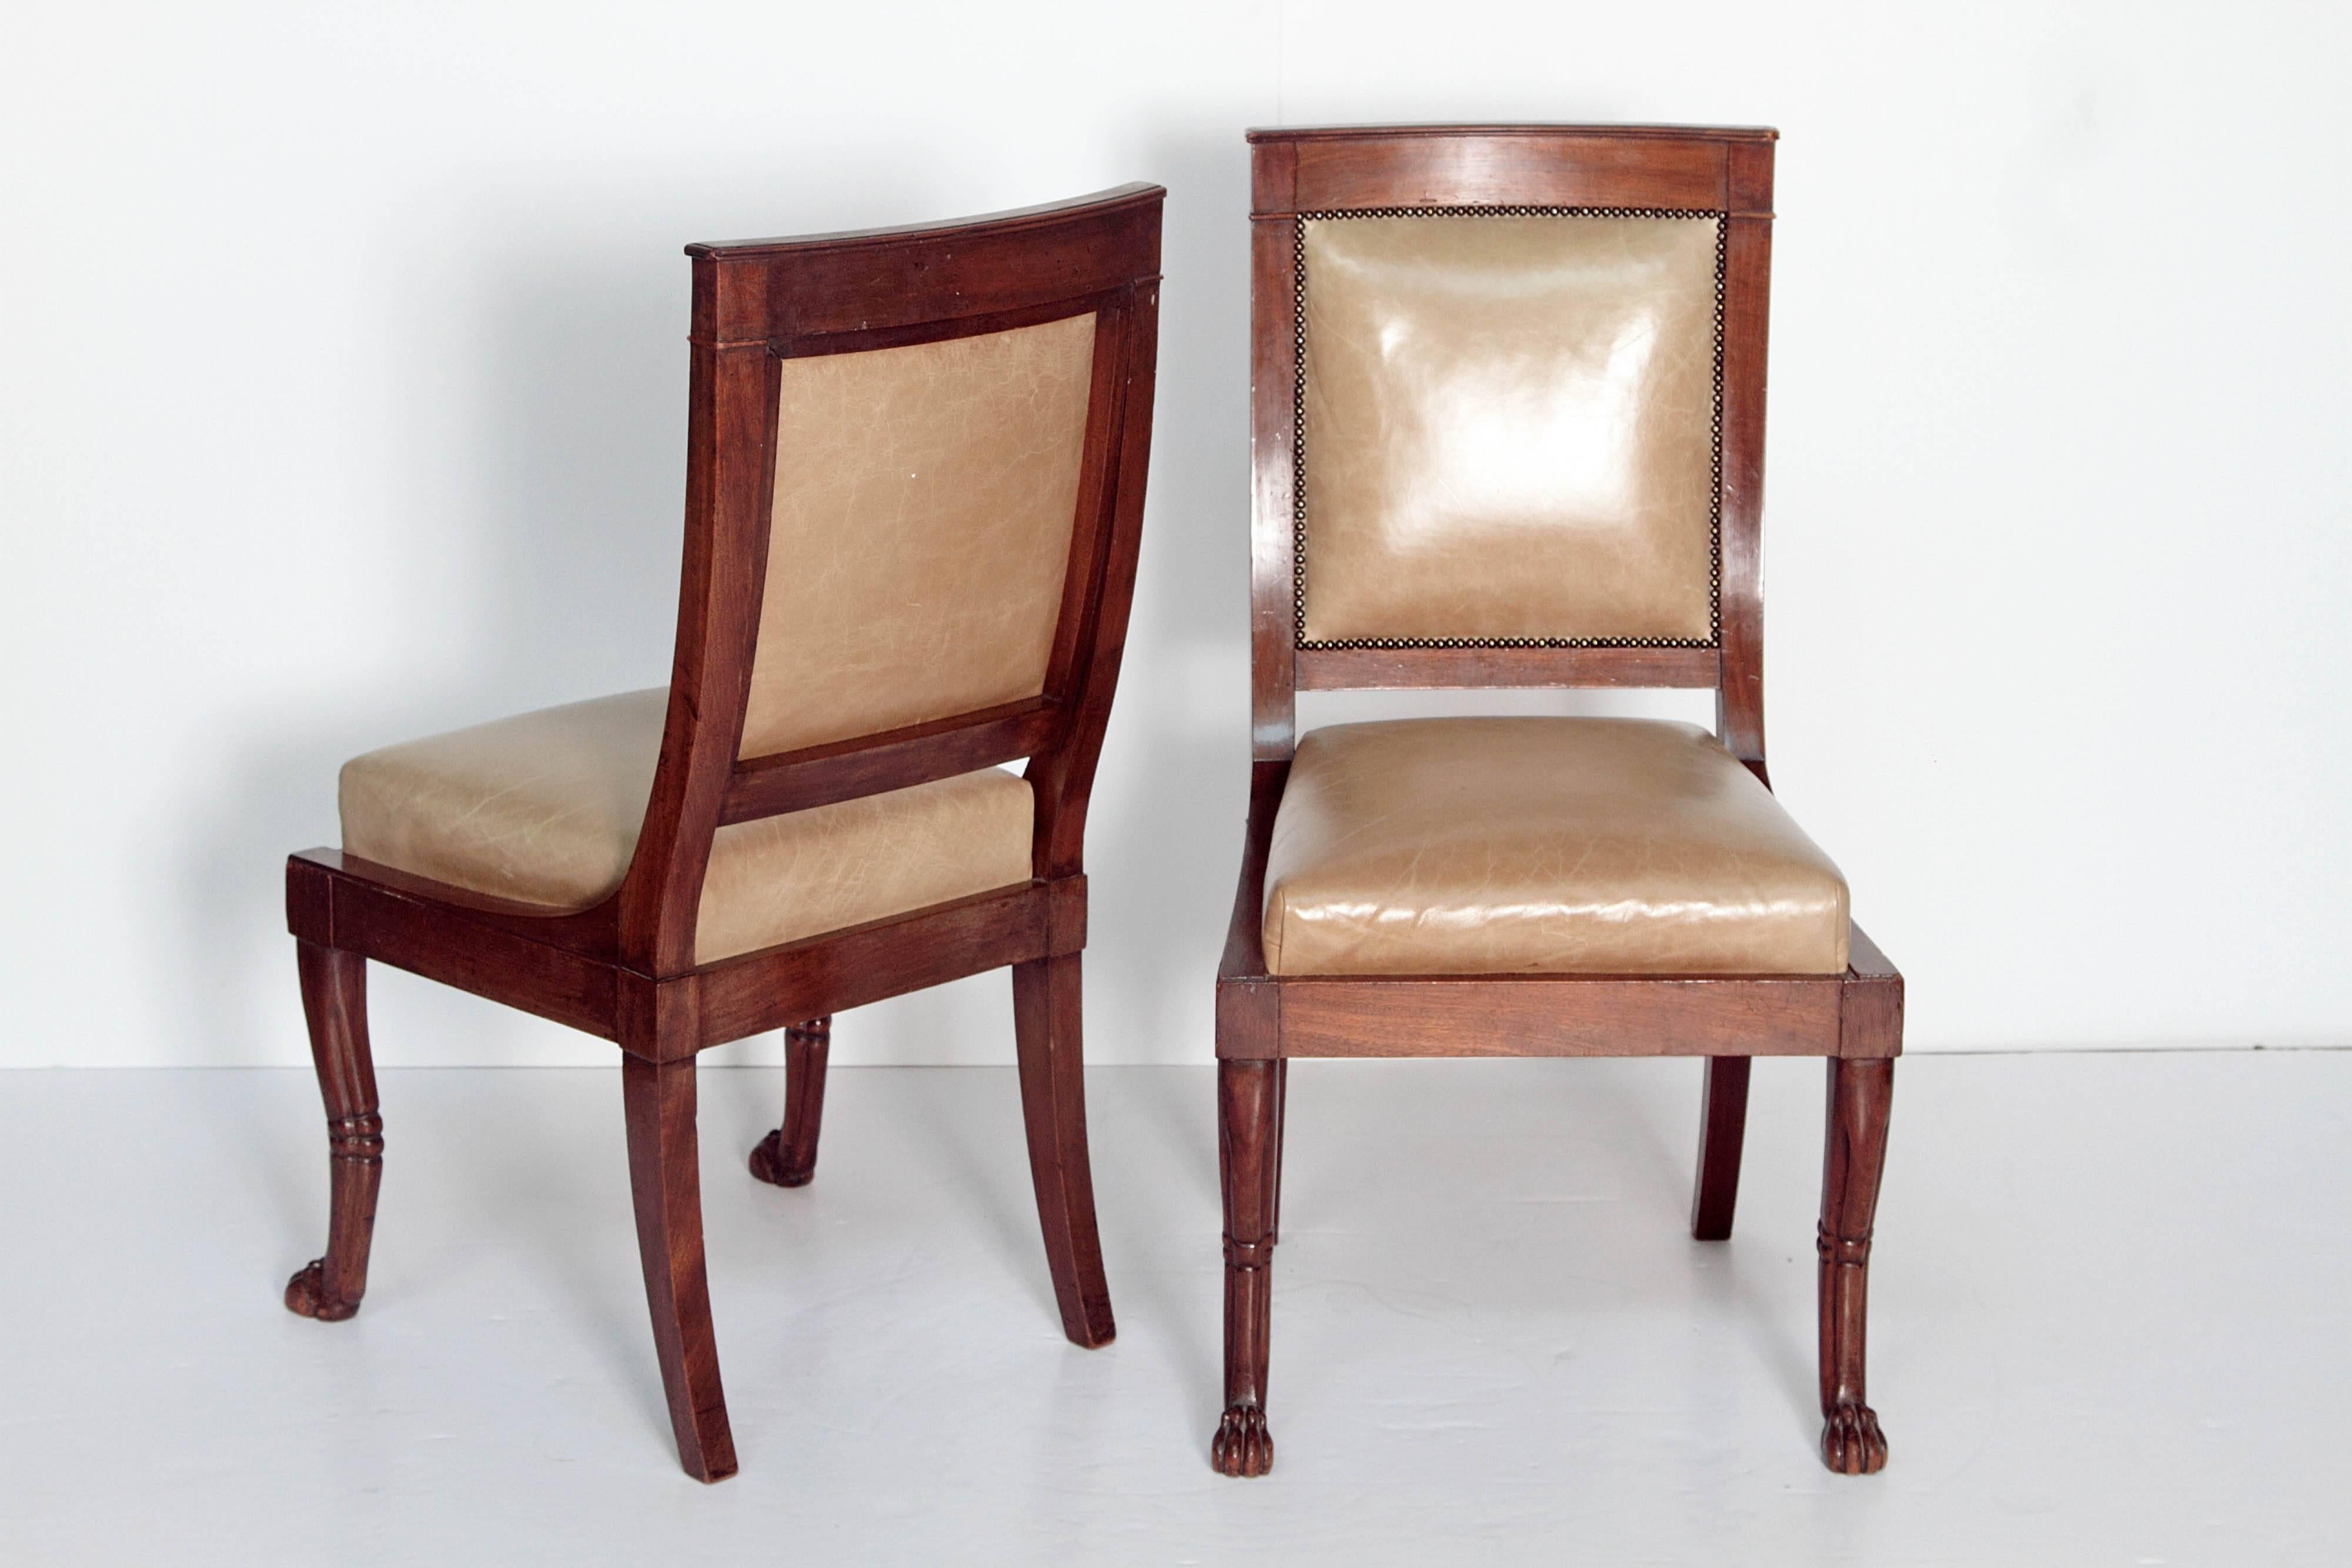 Neoclassical Pair of French Neoclassic Period Chairs